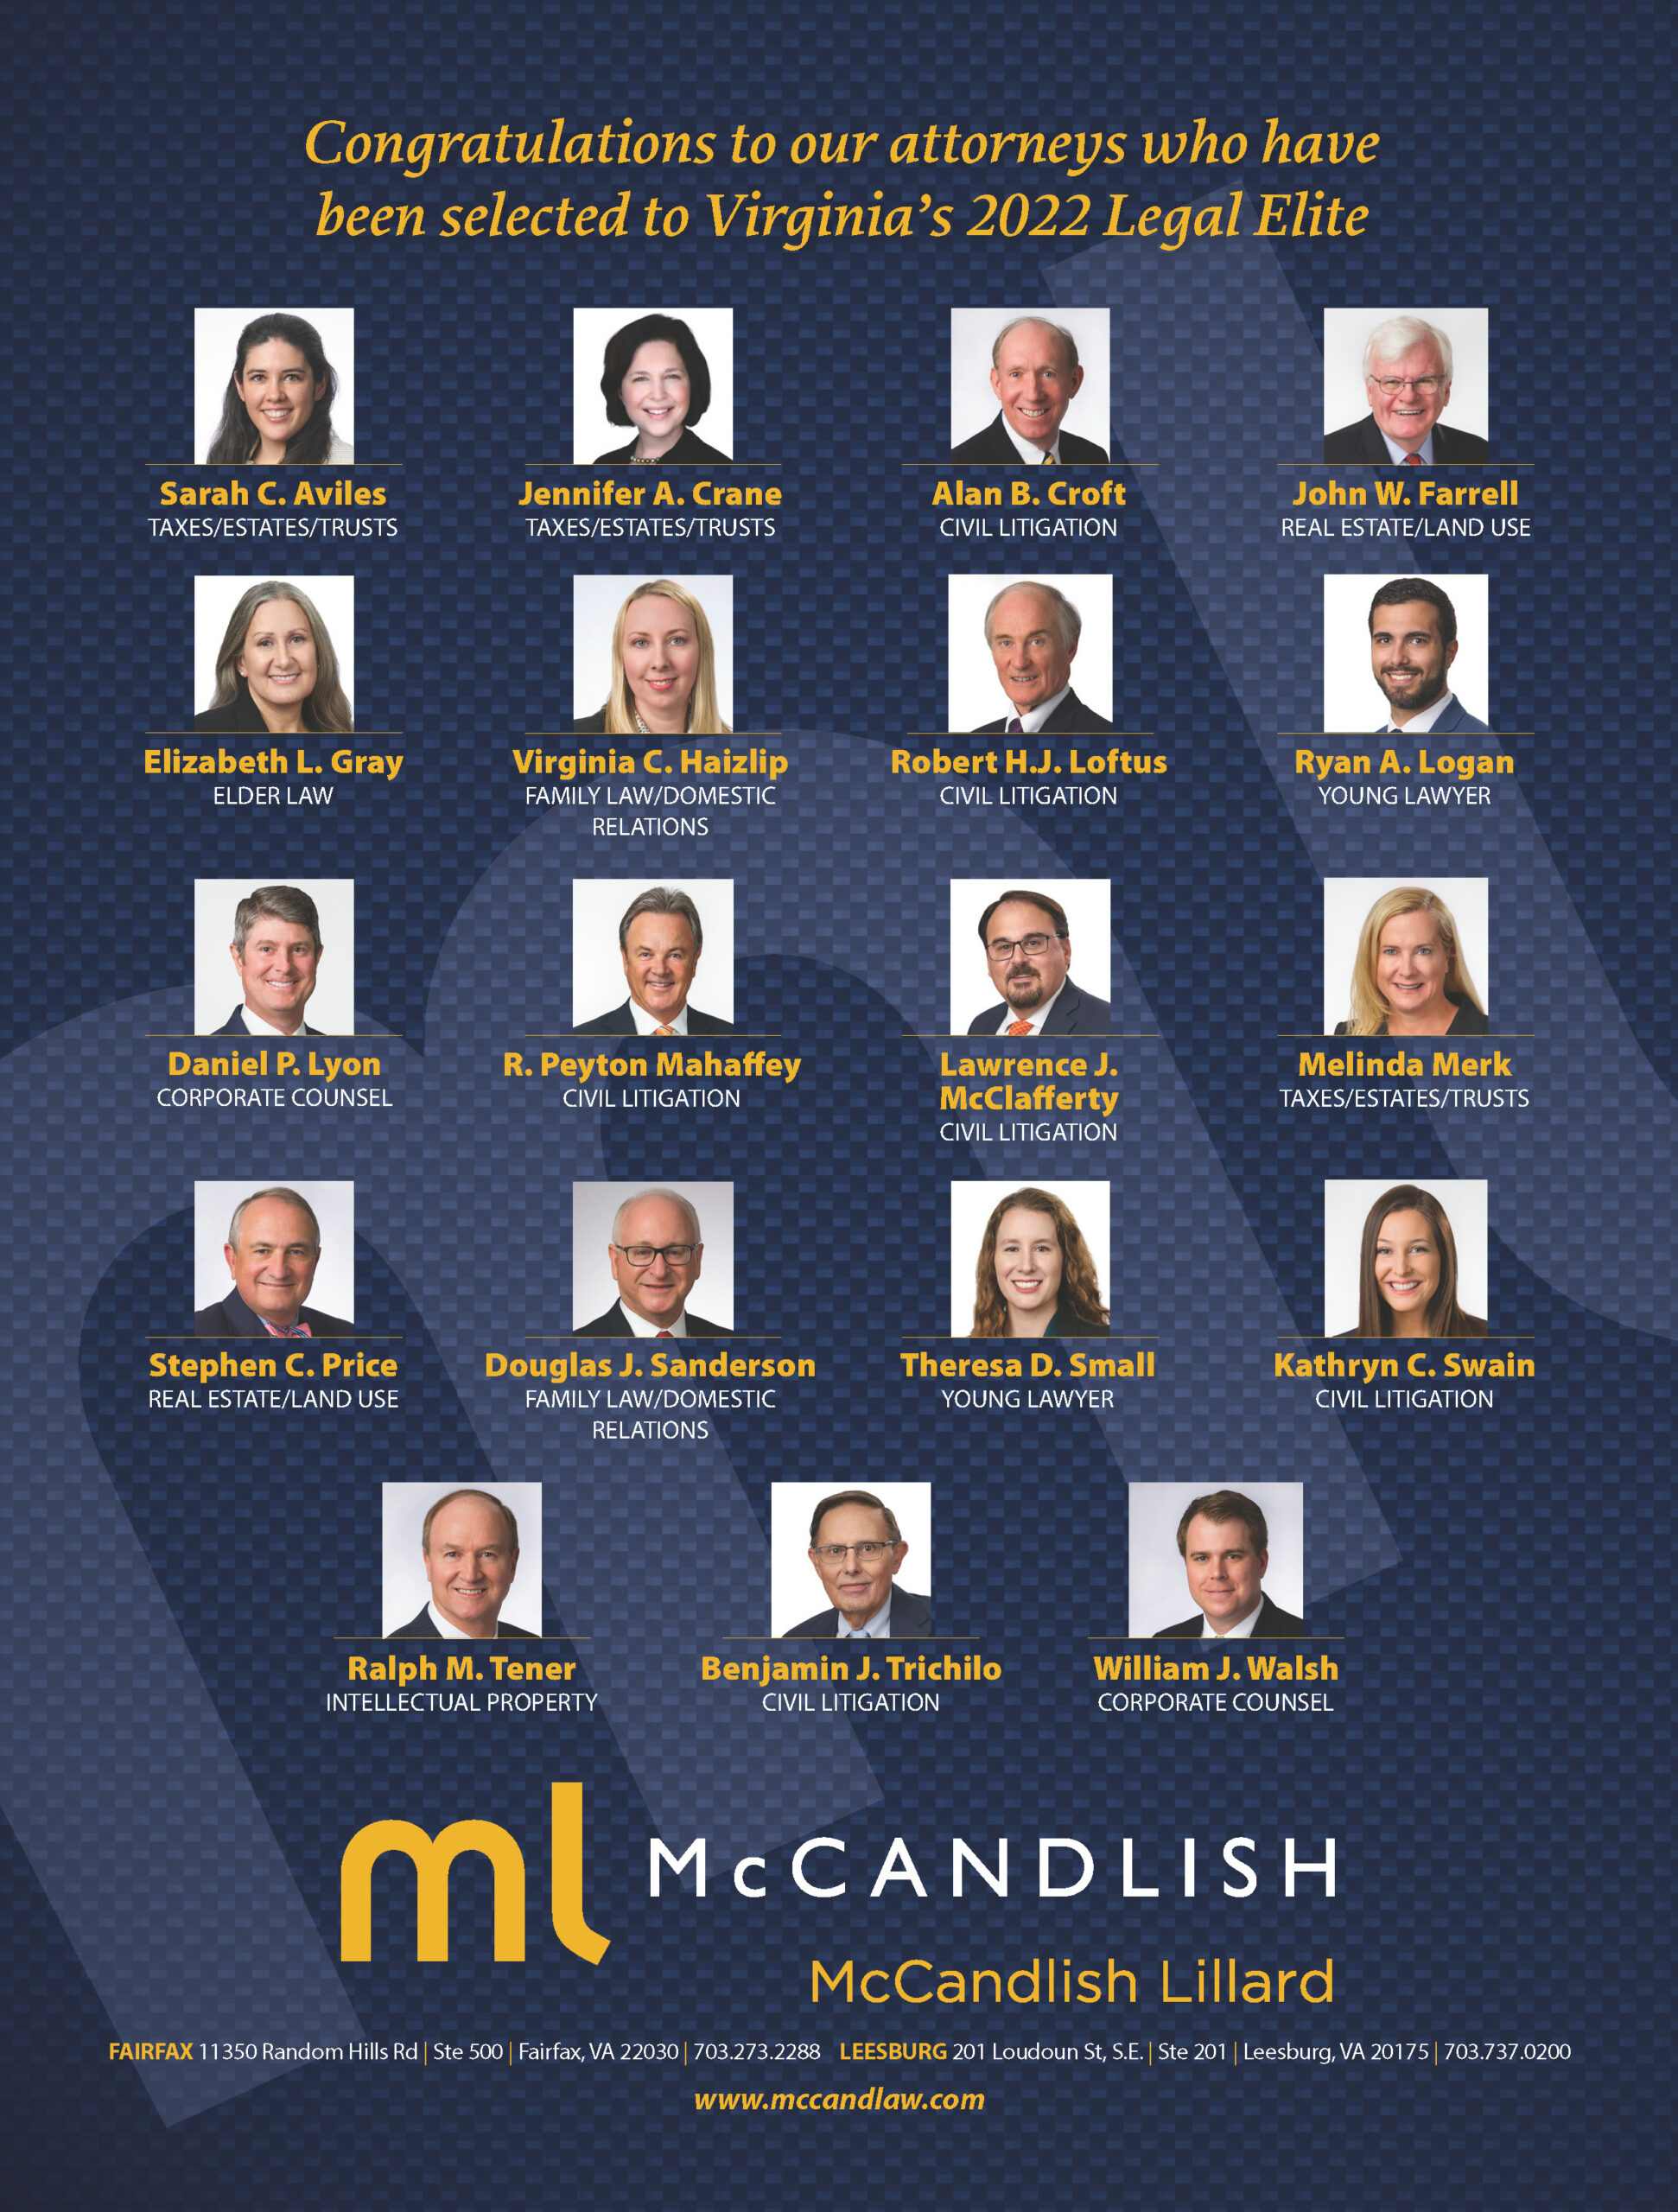 ML LAWYERS NAMED TO LEGAL ELITE FOR 2022